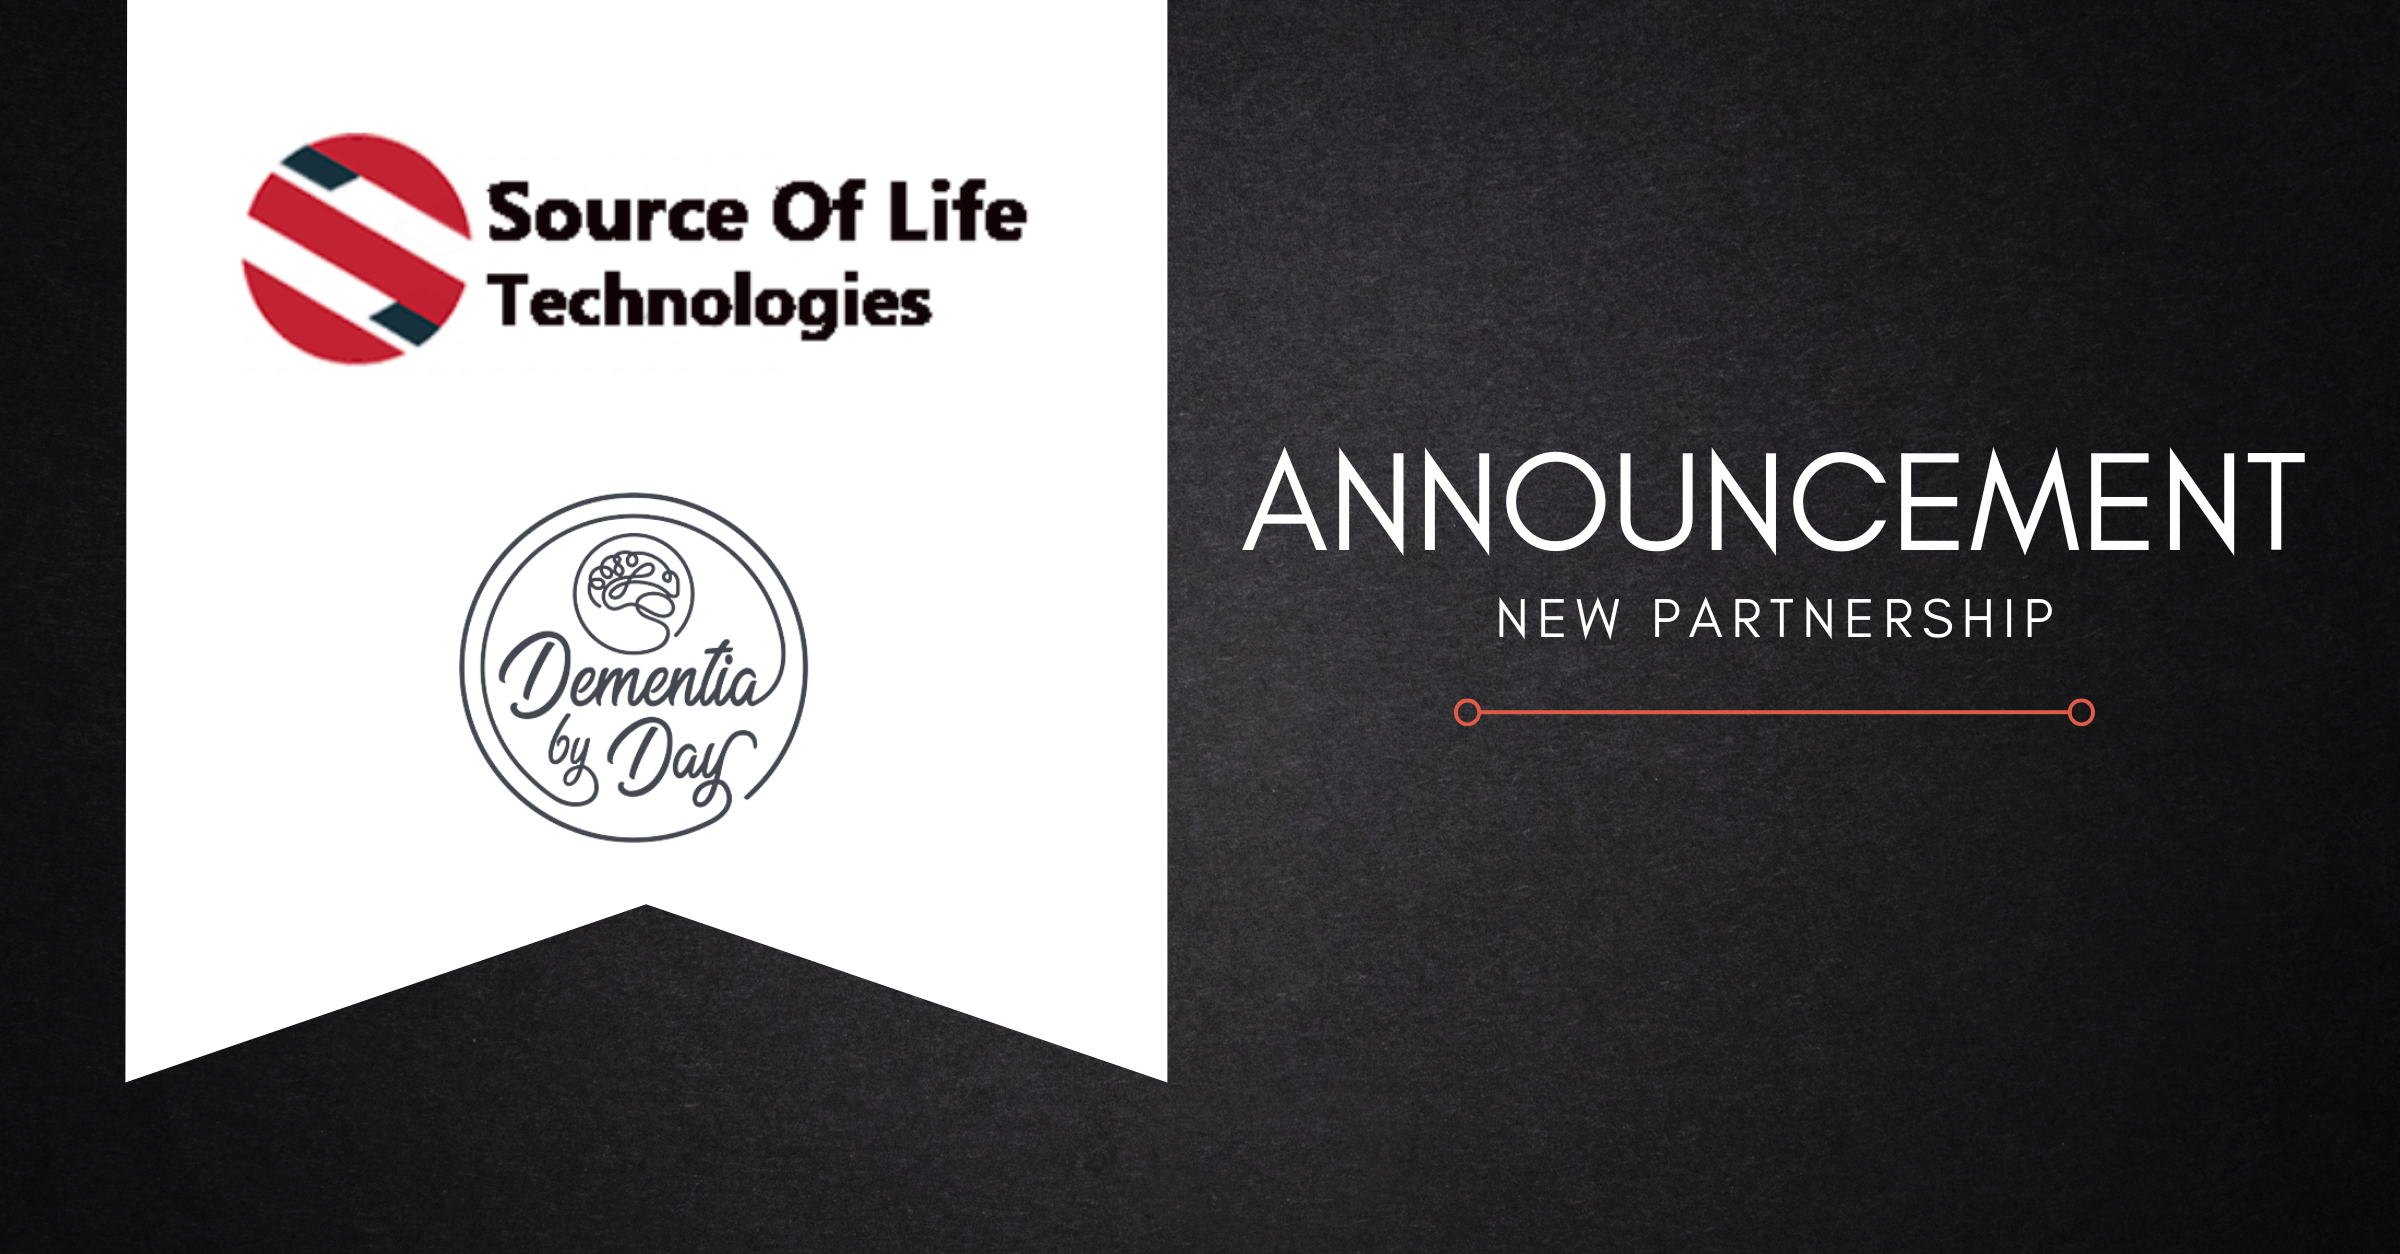 Source of Life Technologies Announces Partnership with Dementia By Day